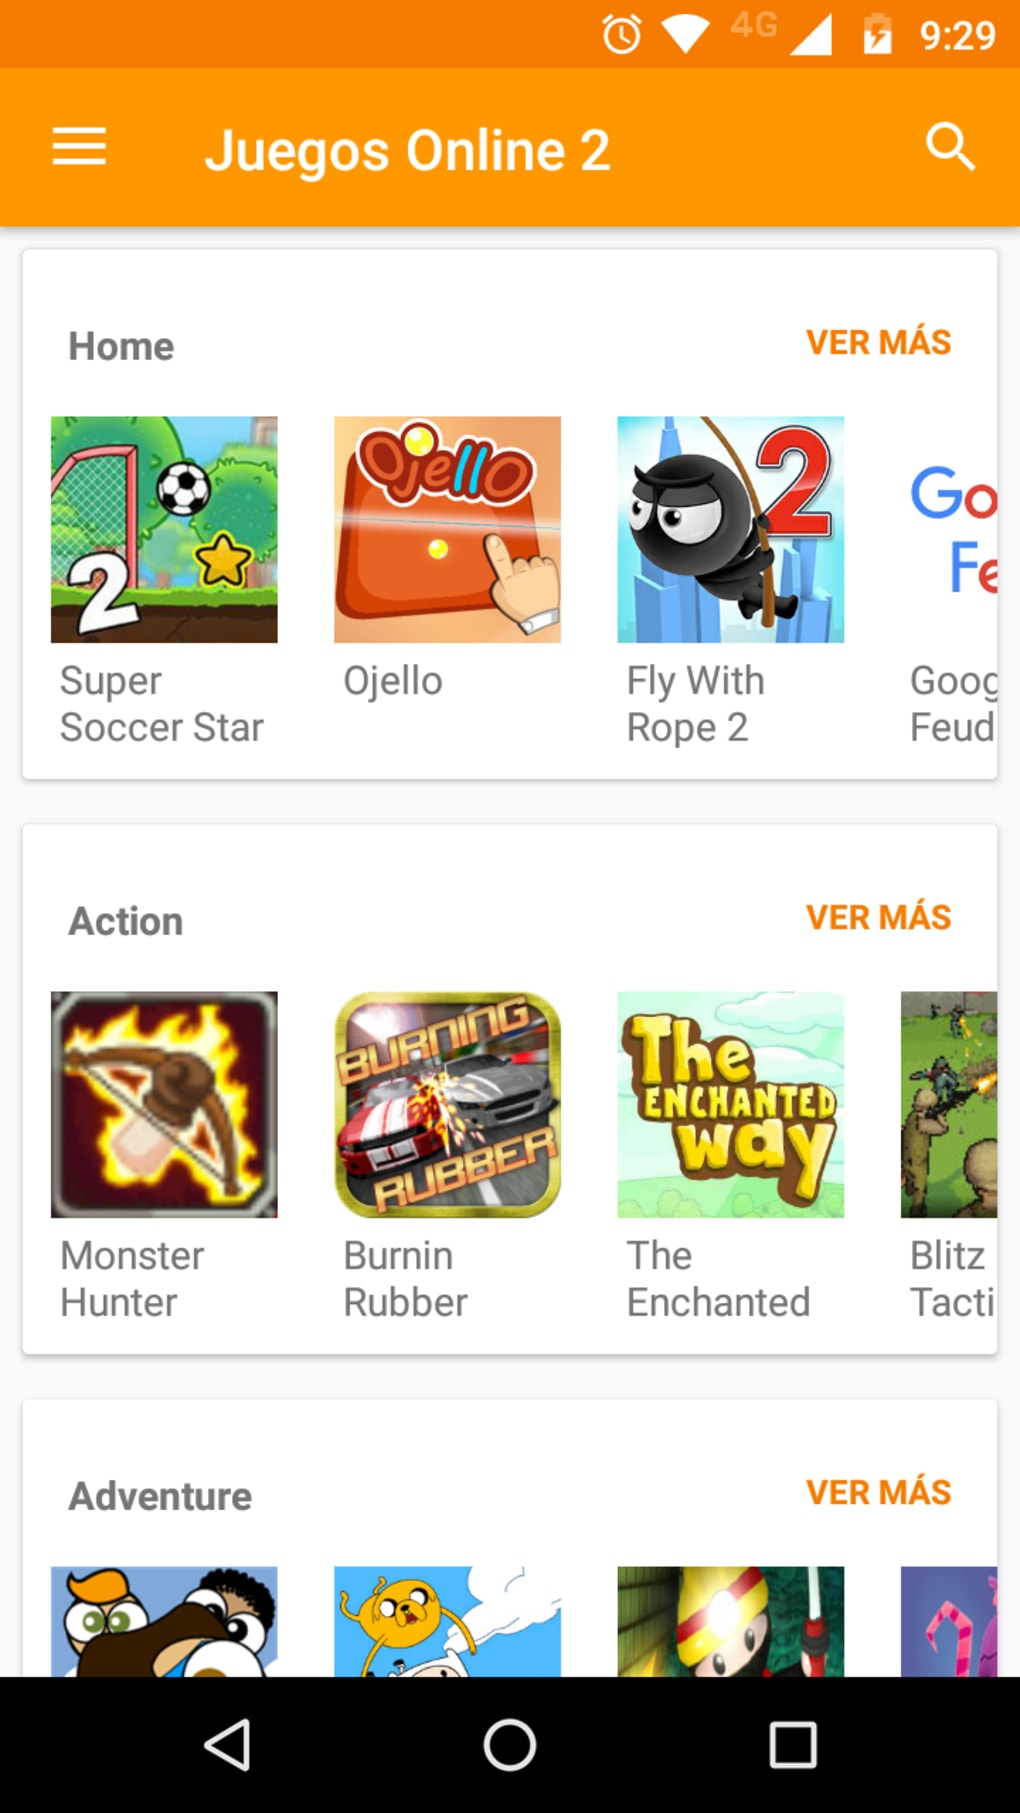 Download Kipas Guys v0.62 APK for Android (Unlimited Money and Gems)